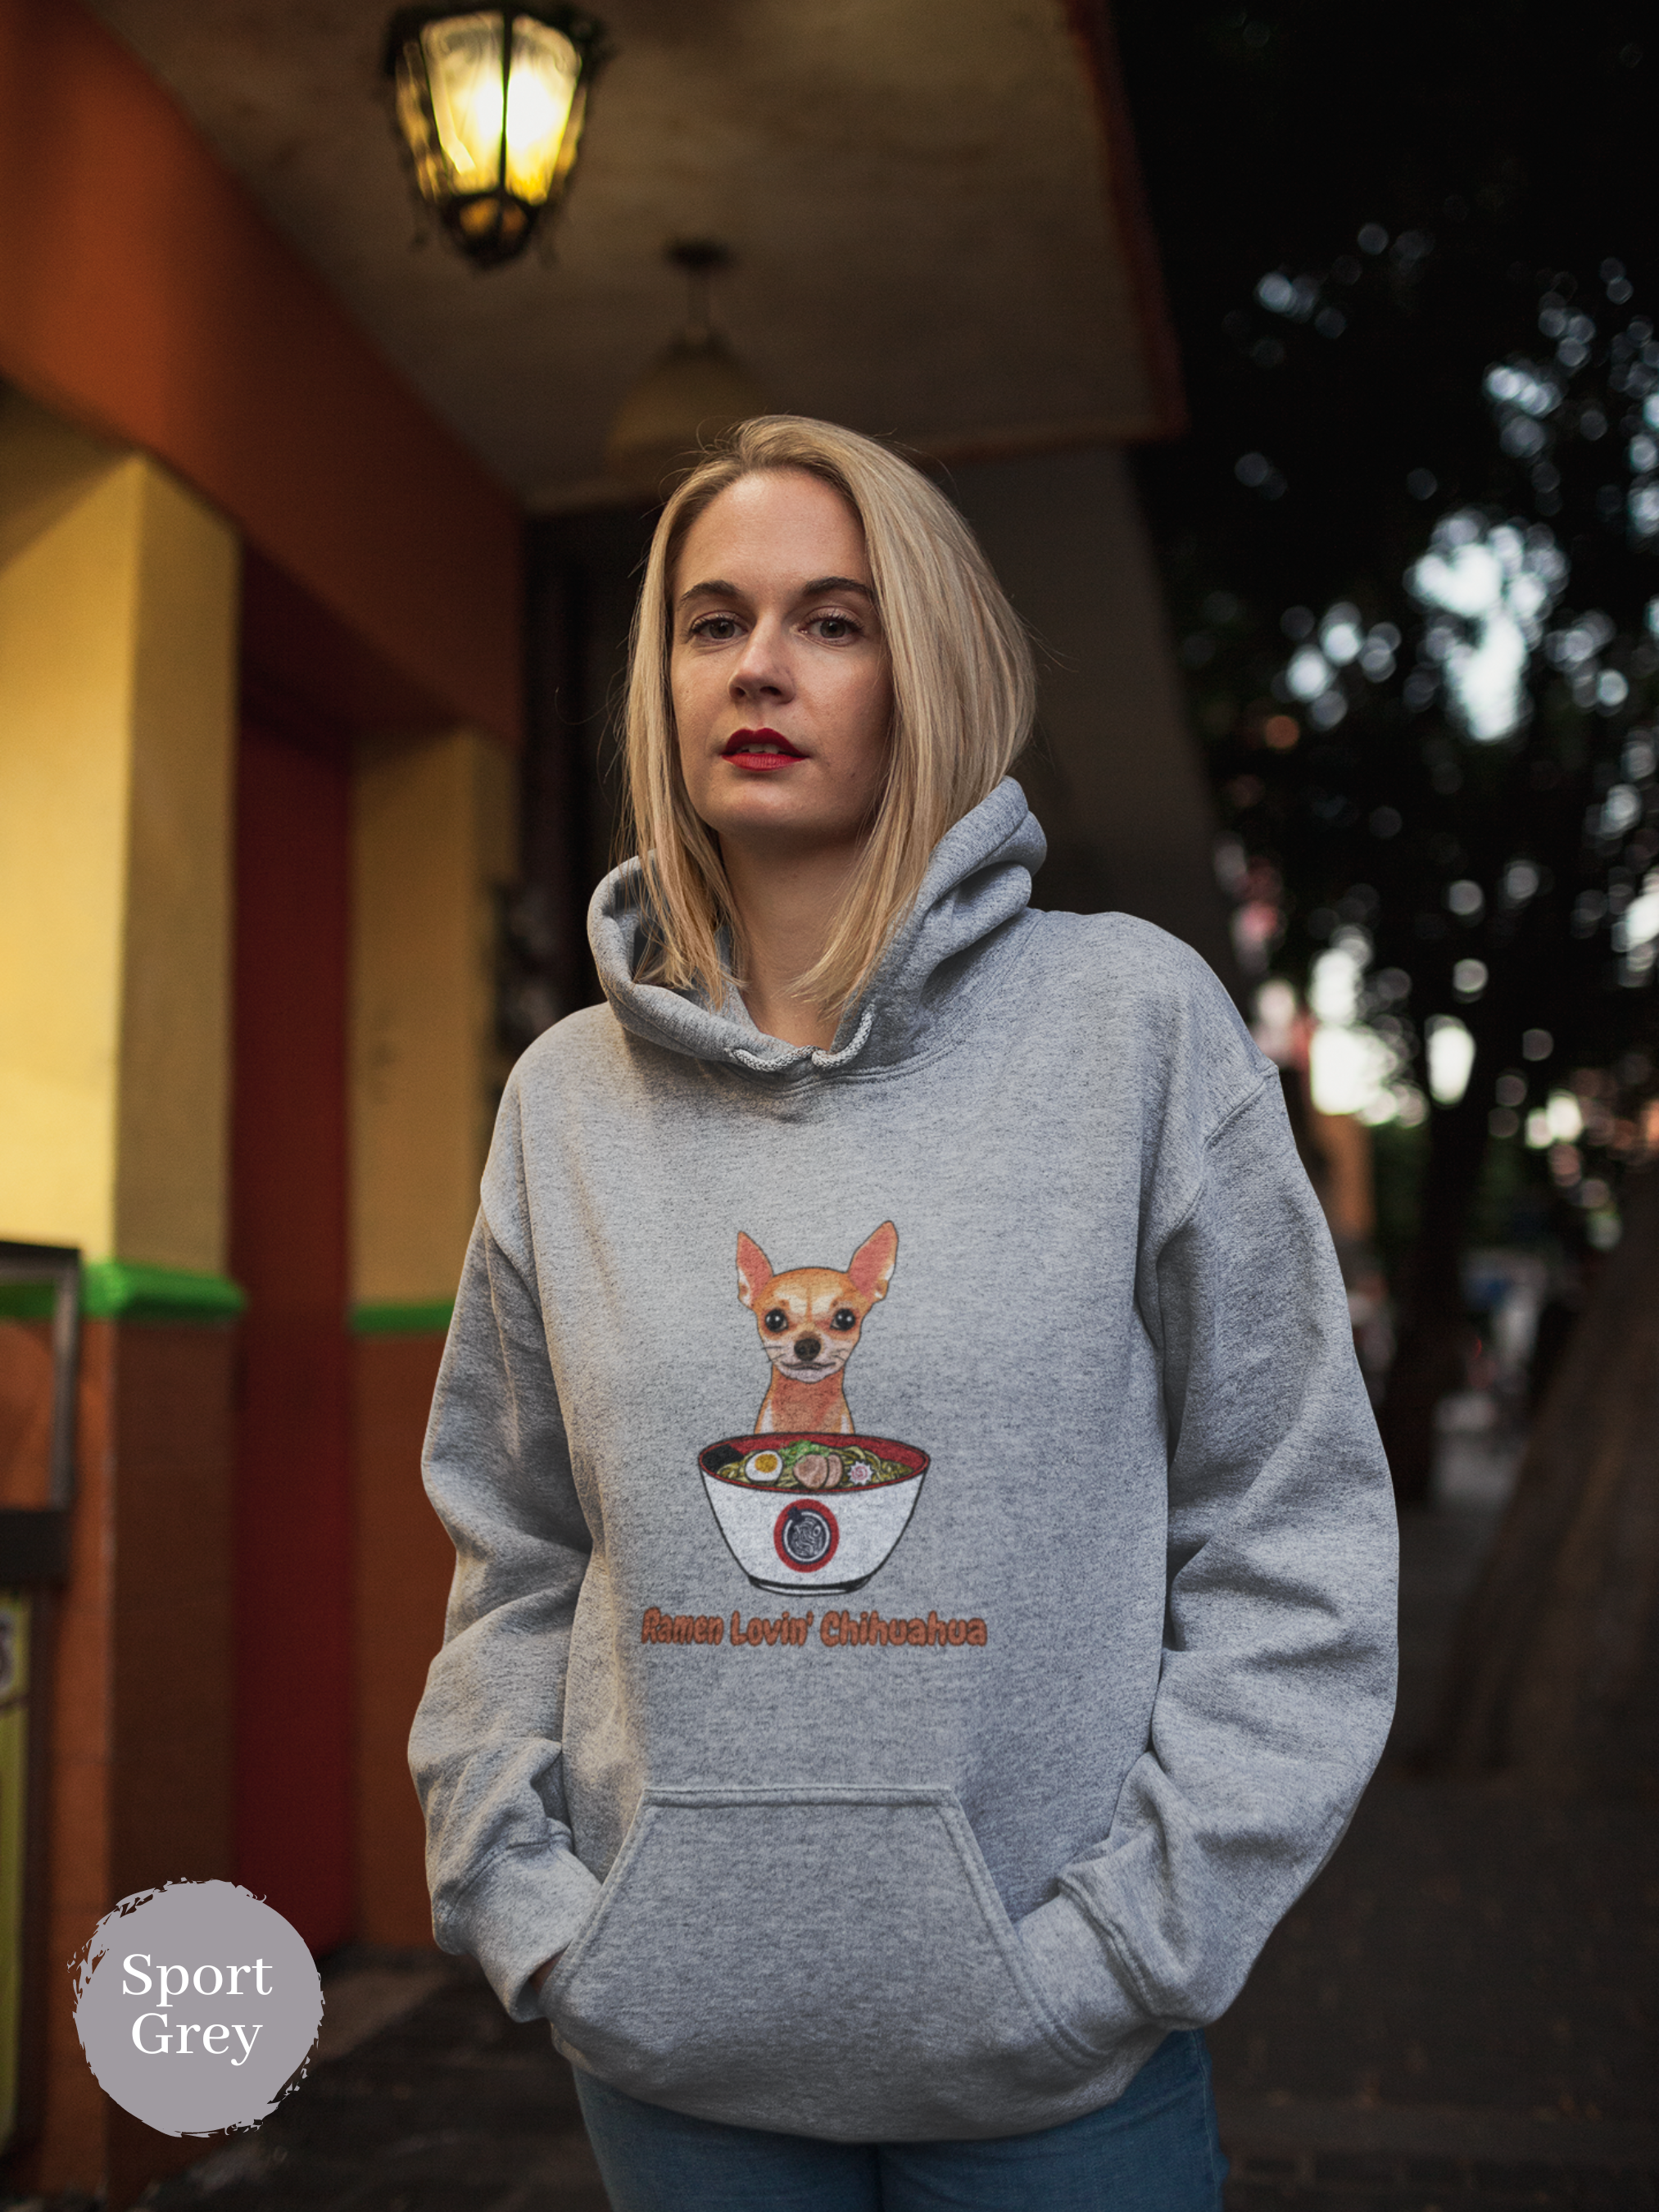 Ramen Hoodie - Show off your Foodie Love and Asian Art Style with Ramen Lovin' Chihuahua Pun Hoodies